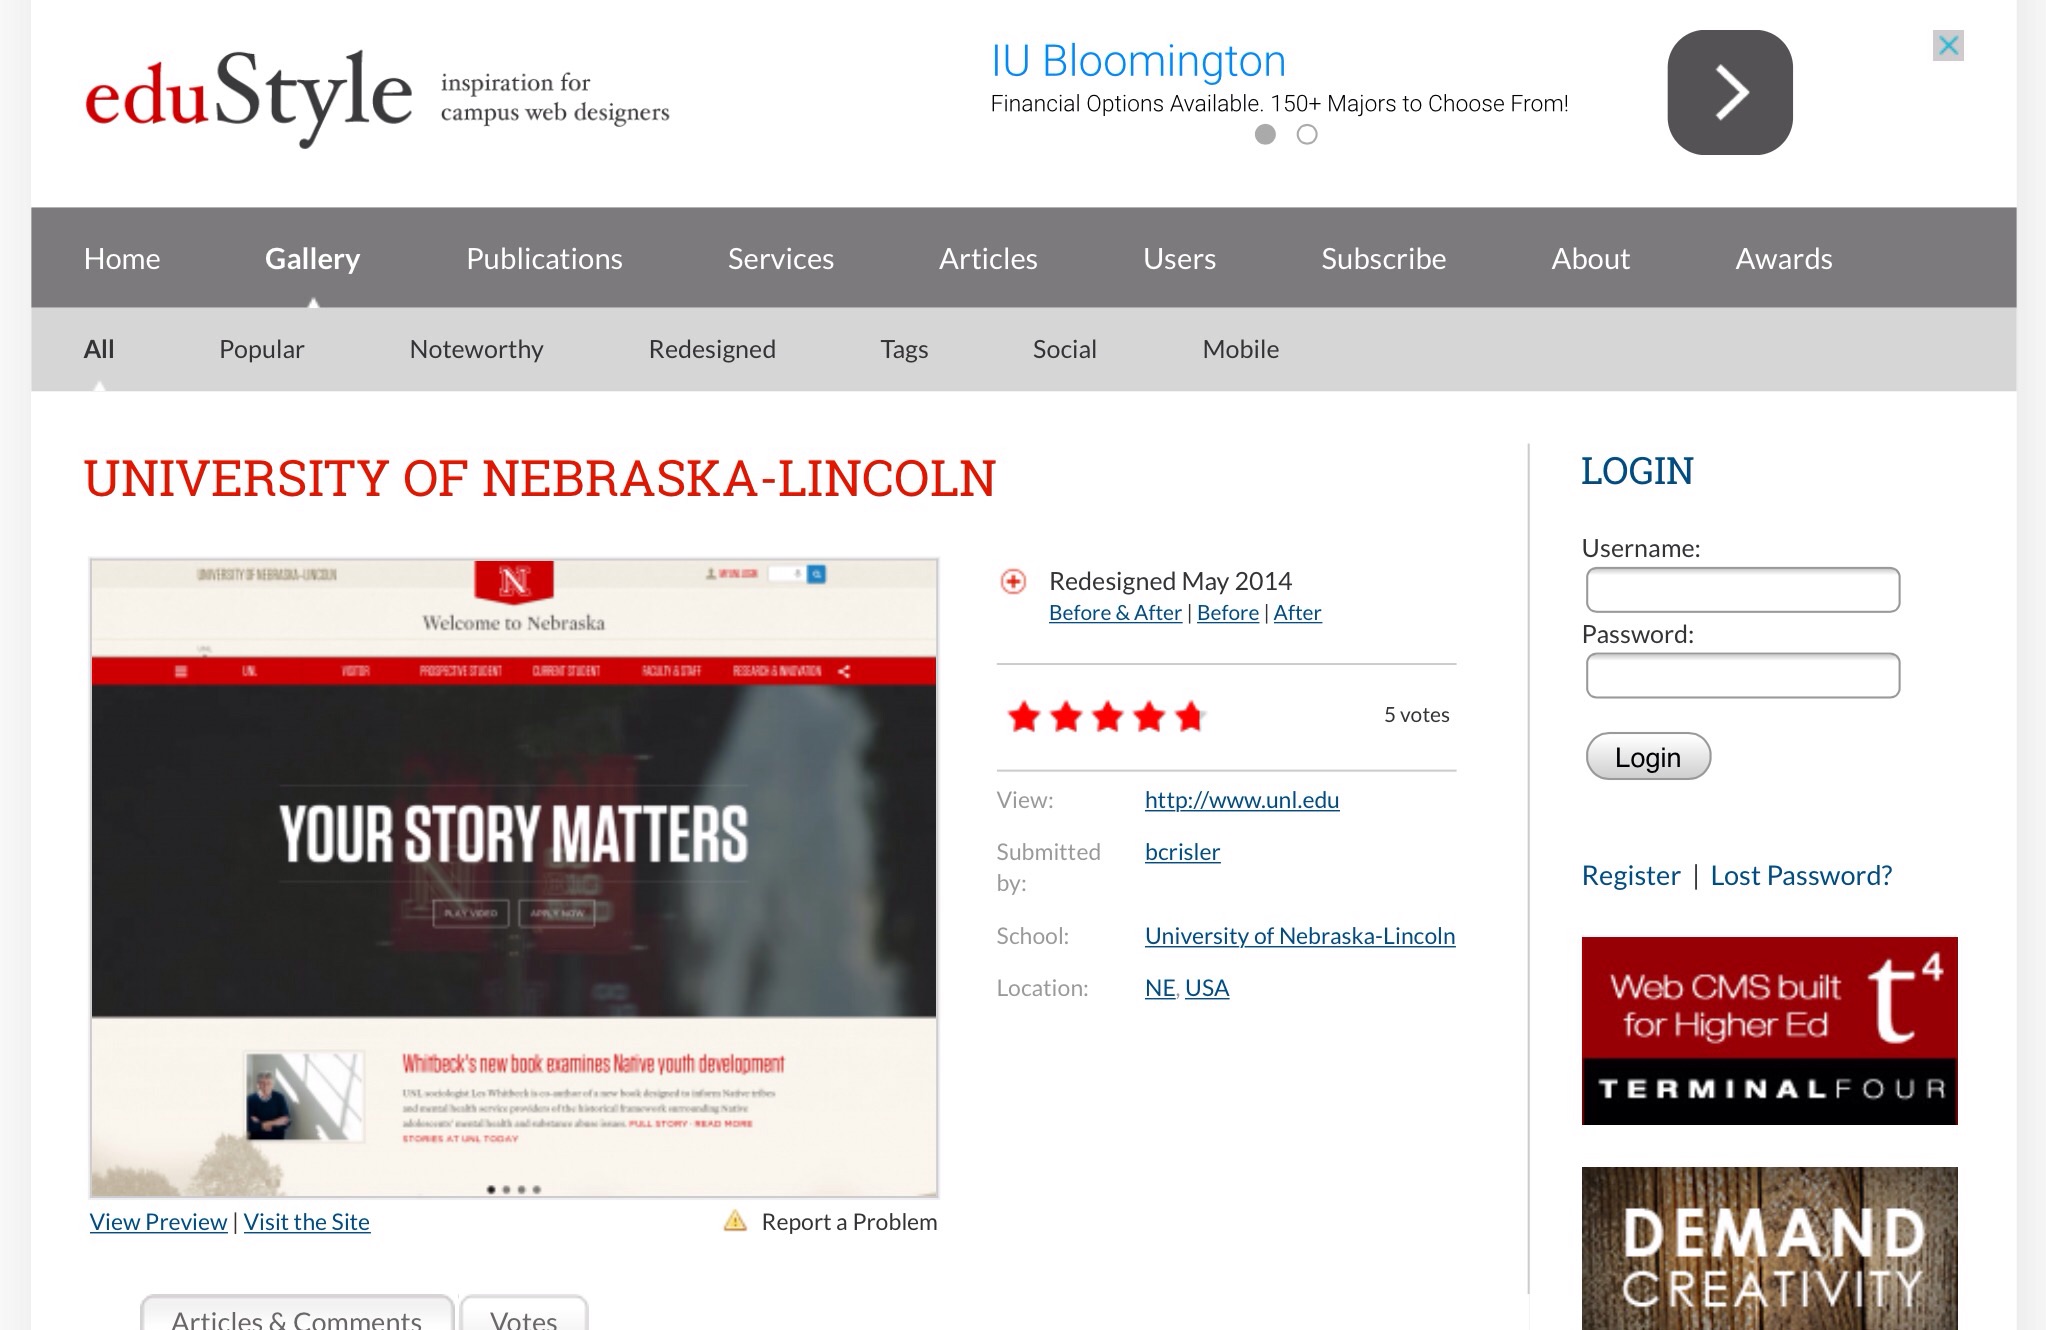 UNL was selected from hundreds of sites submitted throughout the year.